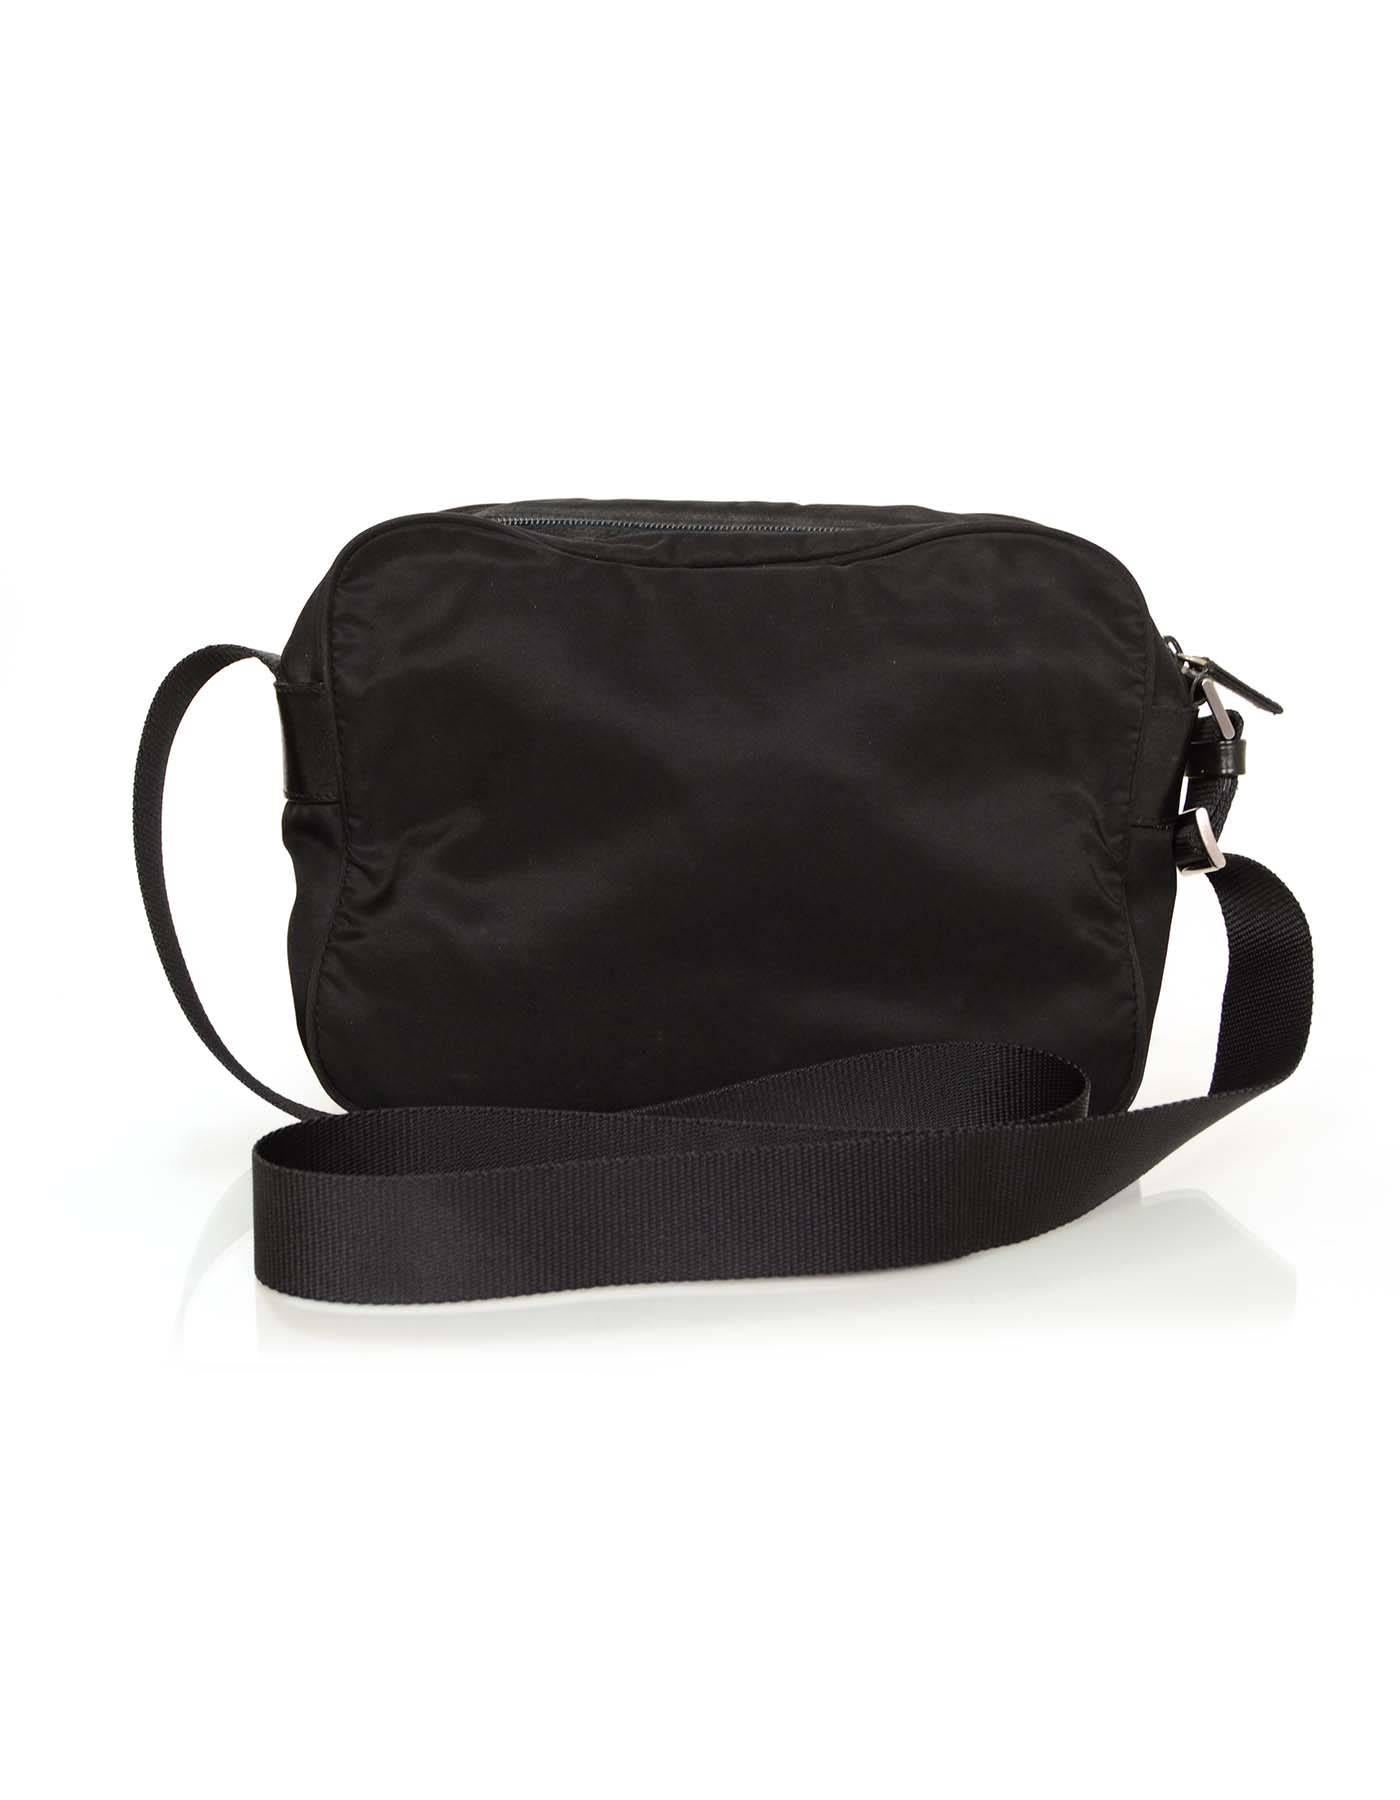 100% Authentic Prada Black Nylon Zip Around Messenger Bag features front zip pocket for easy access to important items in your bag. Crossbody strap can be adjusted to be worn as a shoulder bag.

Made in: Italy
Color: Black
Hardware: